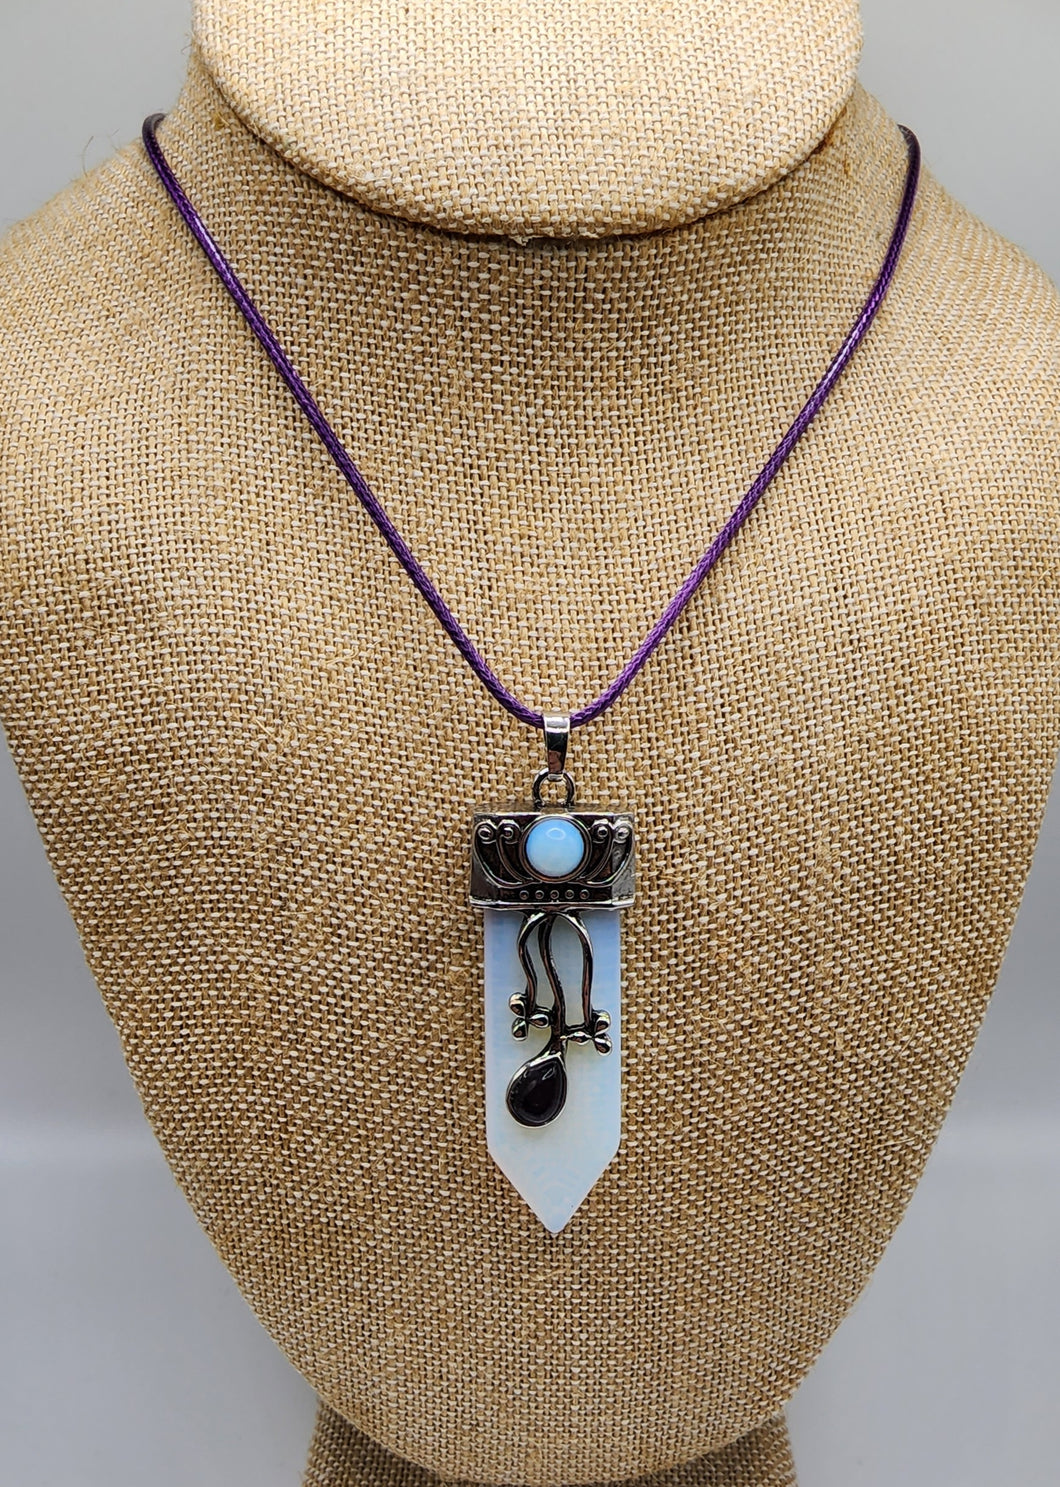 Opalite Gemstone Pendant With Decorative Silver Plated Bail Hung on Wax Cotton Cord